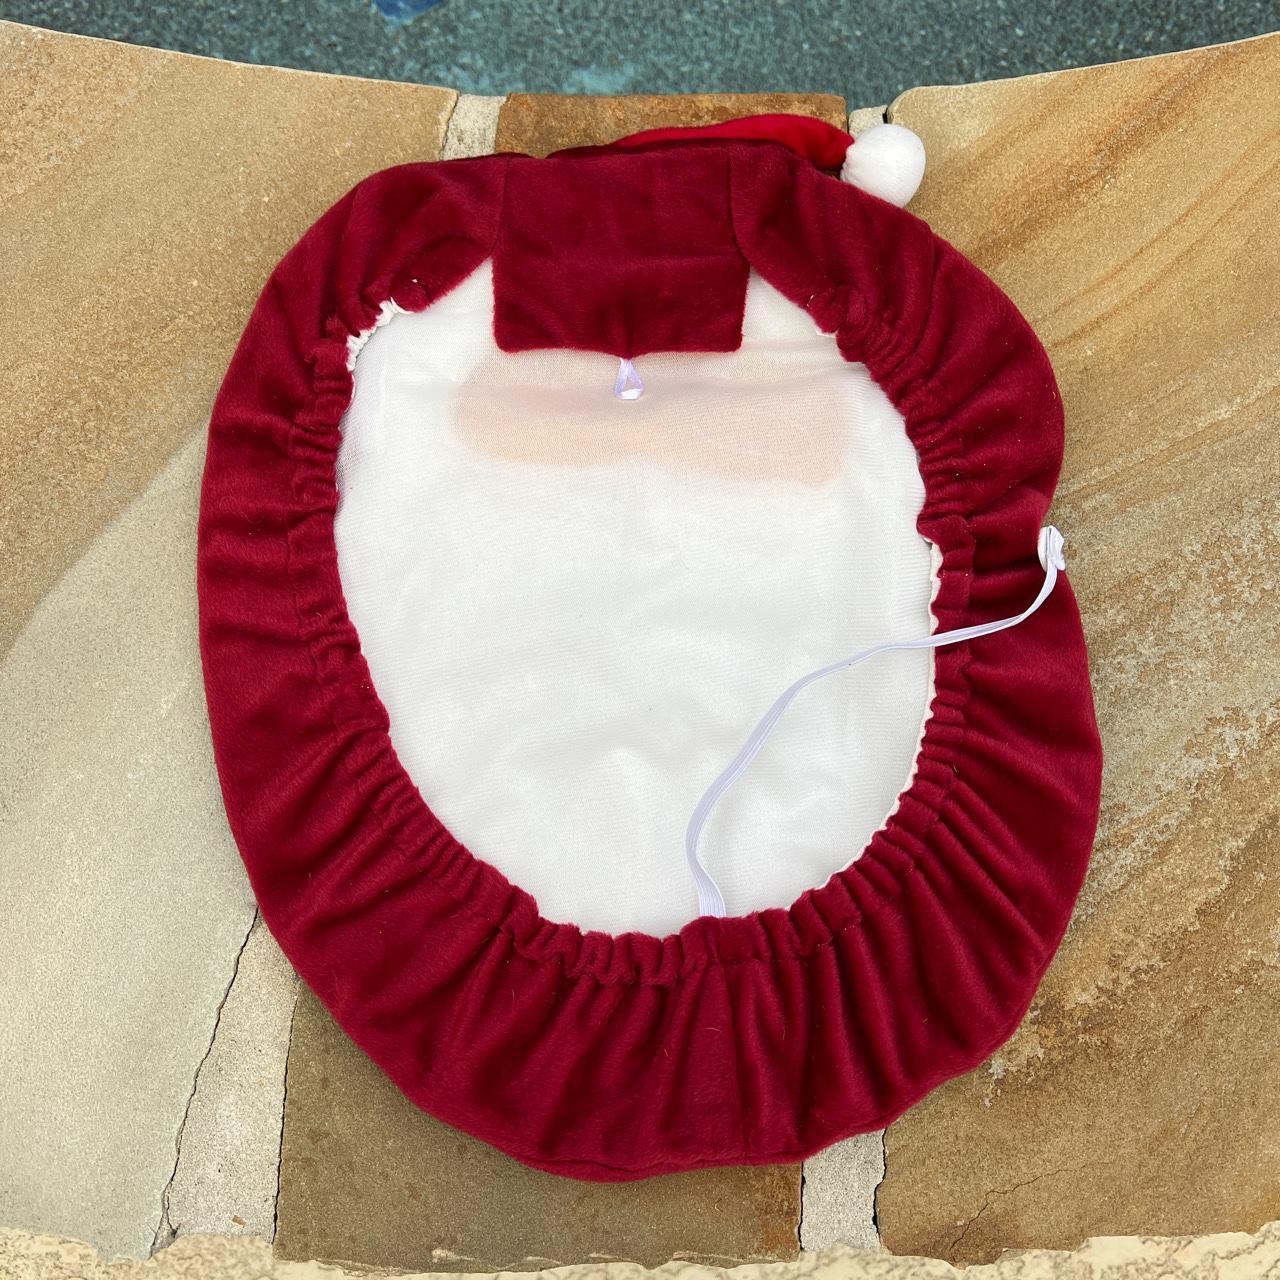 Product Image 4 - GIFTING SANTA TOILET COVER

🌈Standard size